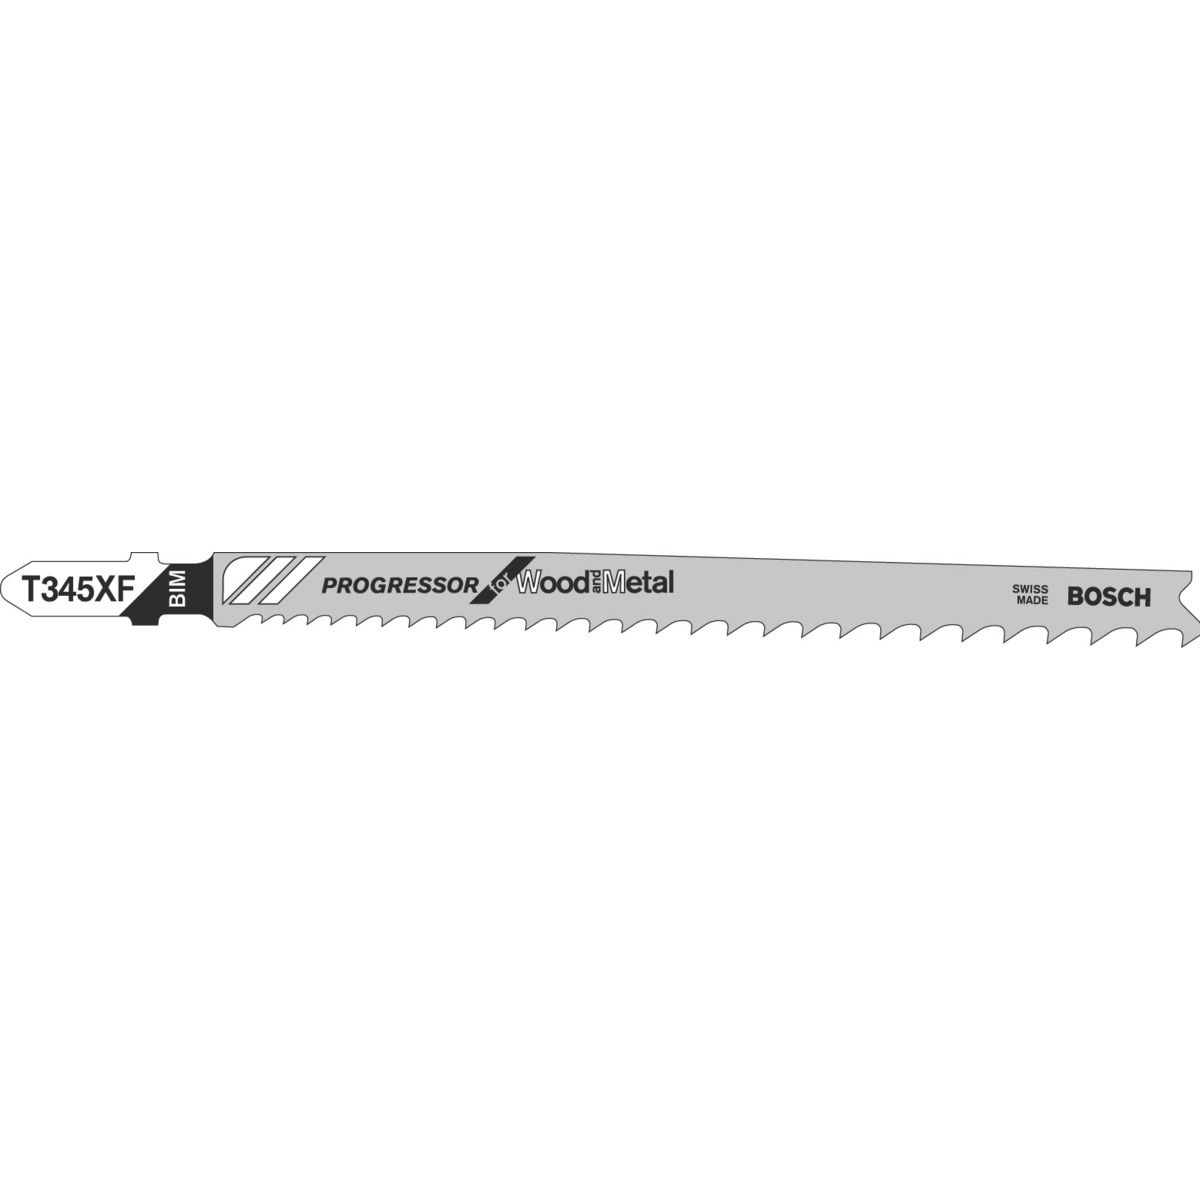 Image of Bosch T345XF Wood Jigsaw Blades - Pack of 5